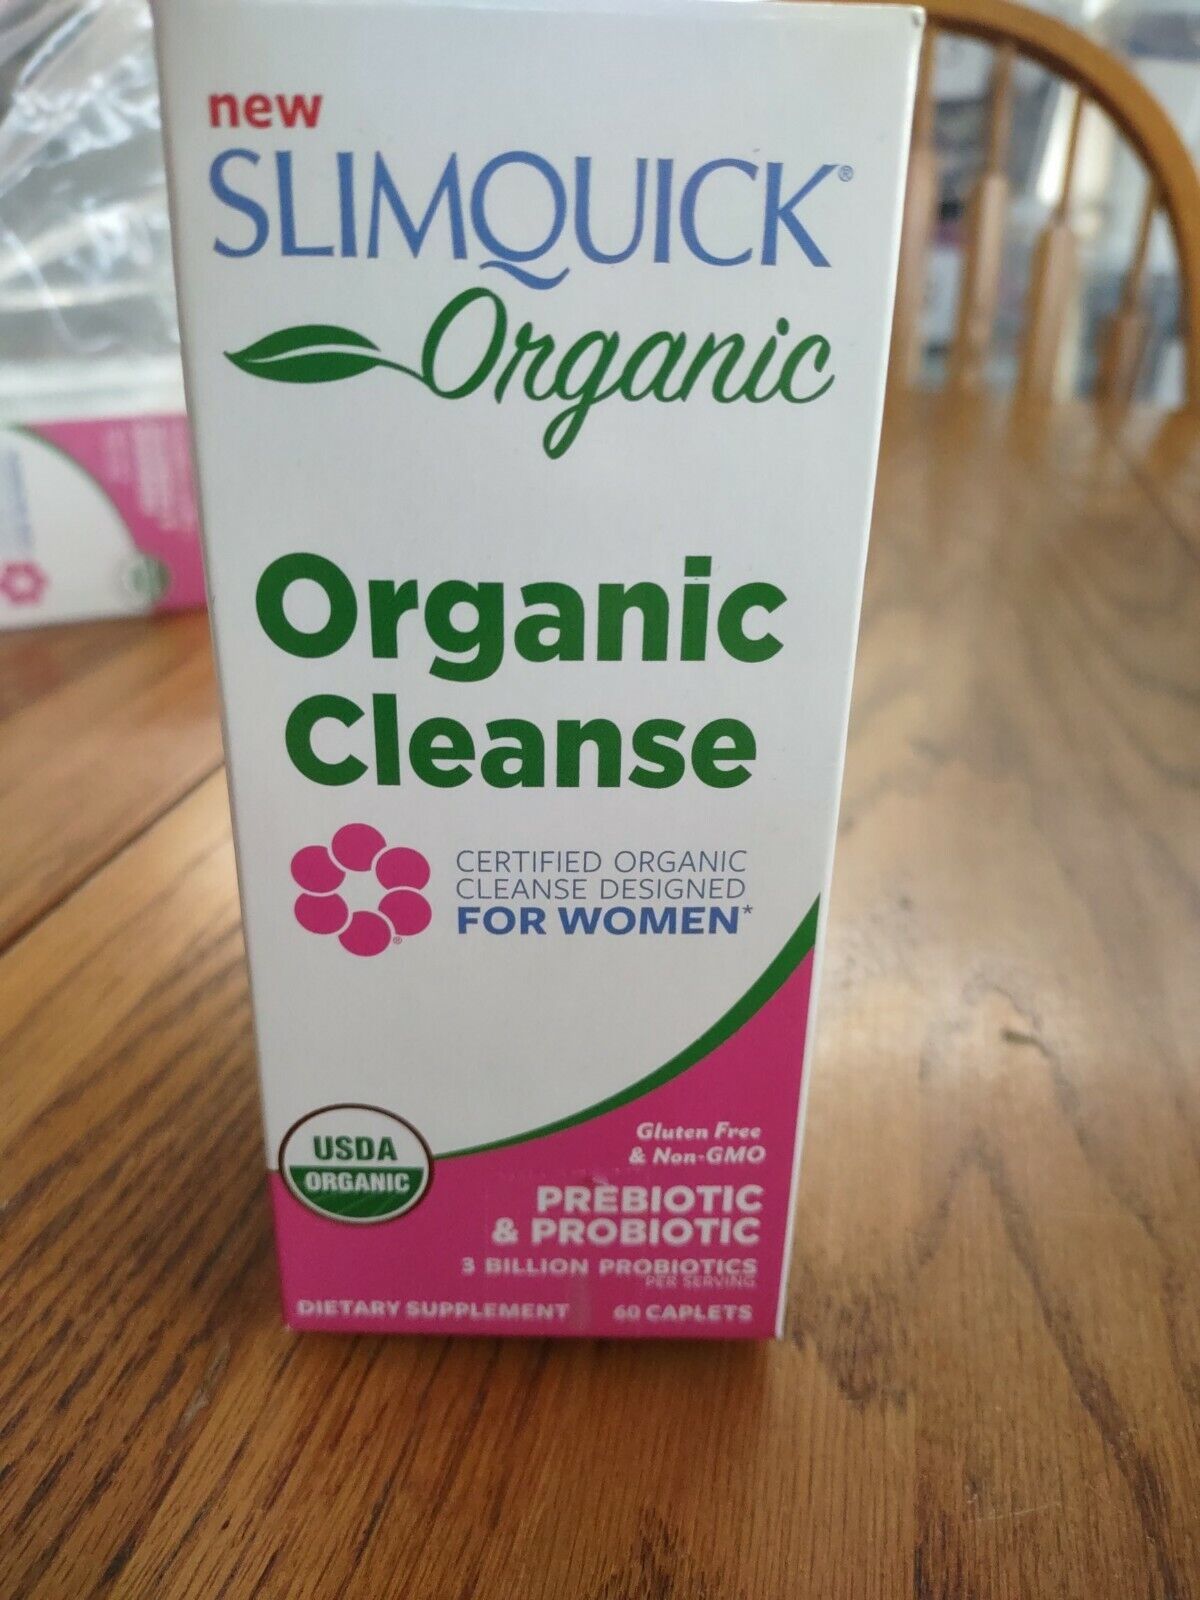 Slim quick Organic Organic Cleanse Probiotic & Probiotic-BRAND NEW-SHIPS N 24HRS - $26.61